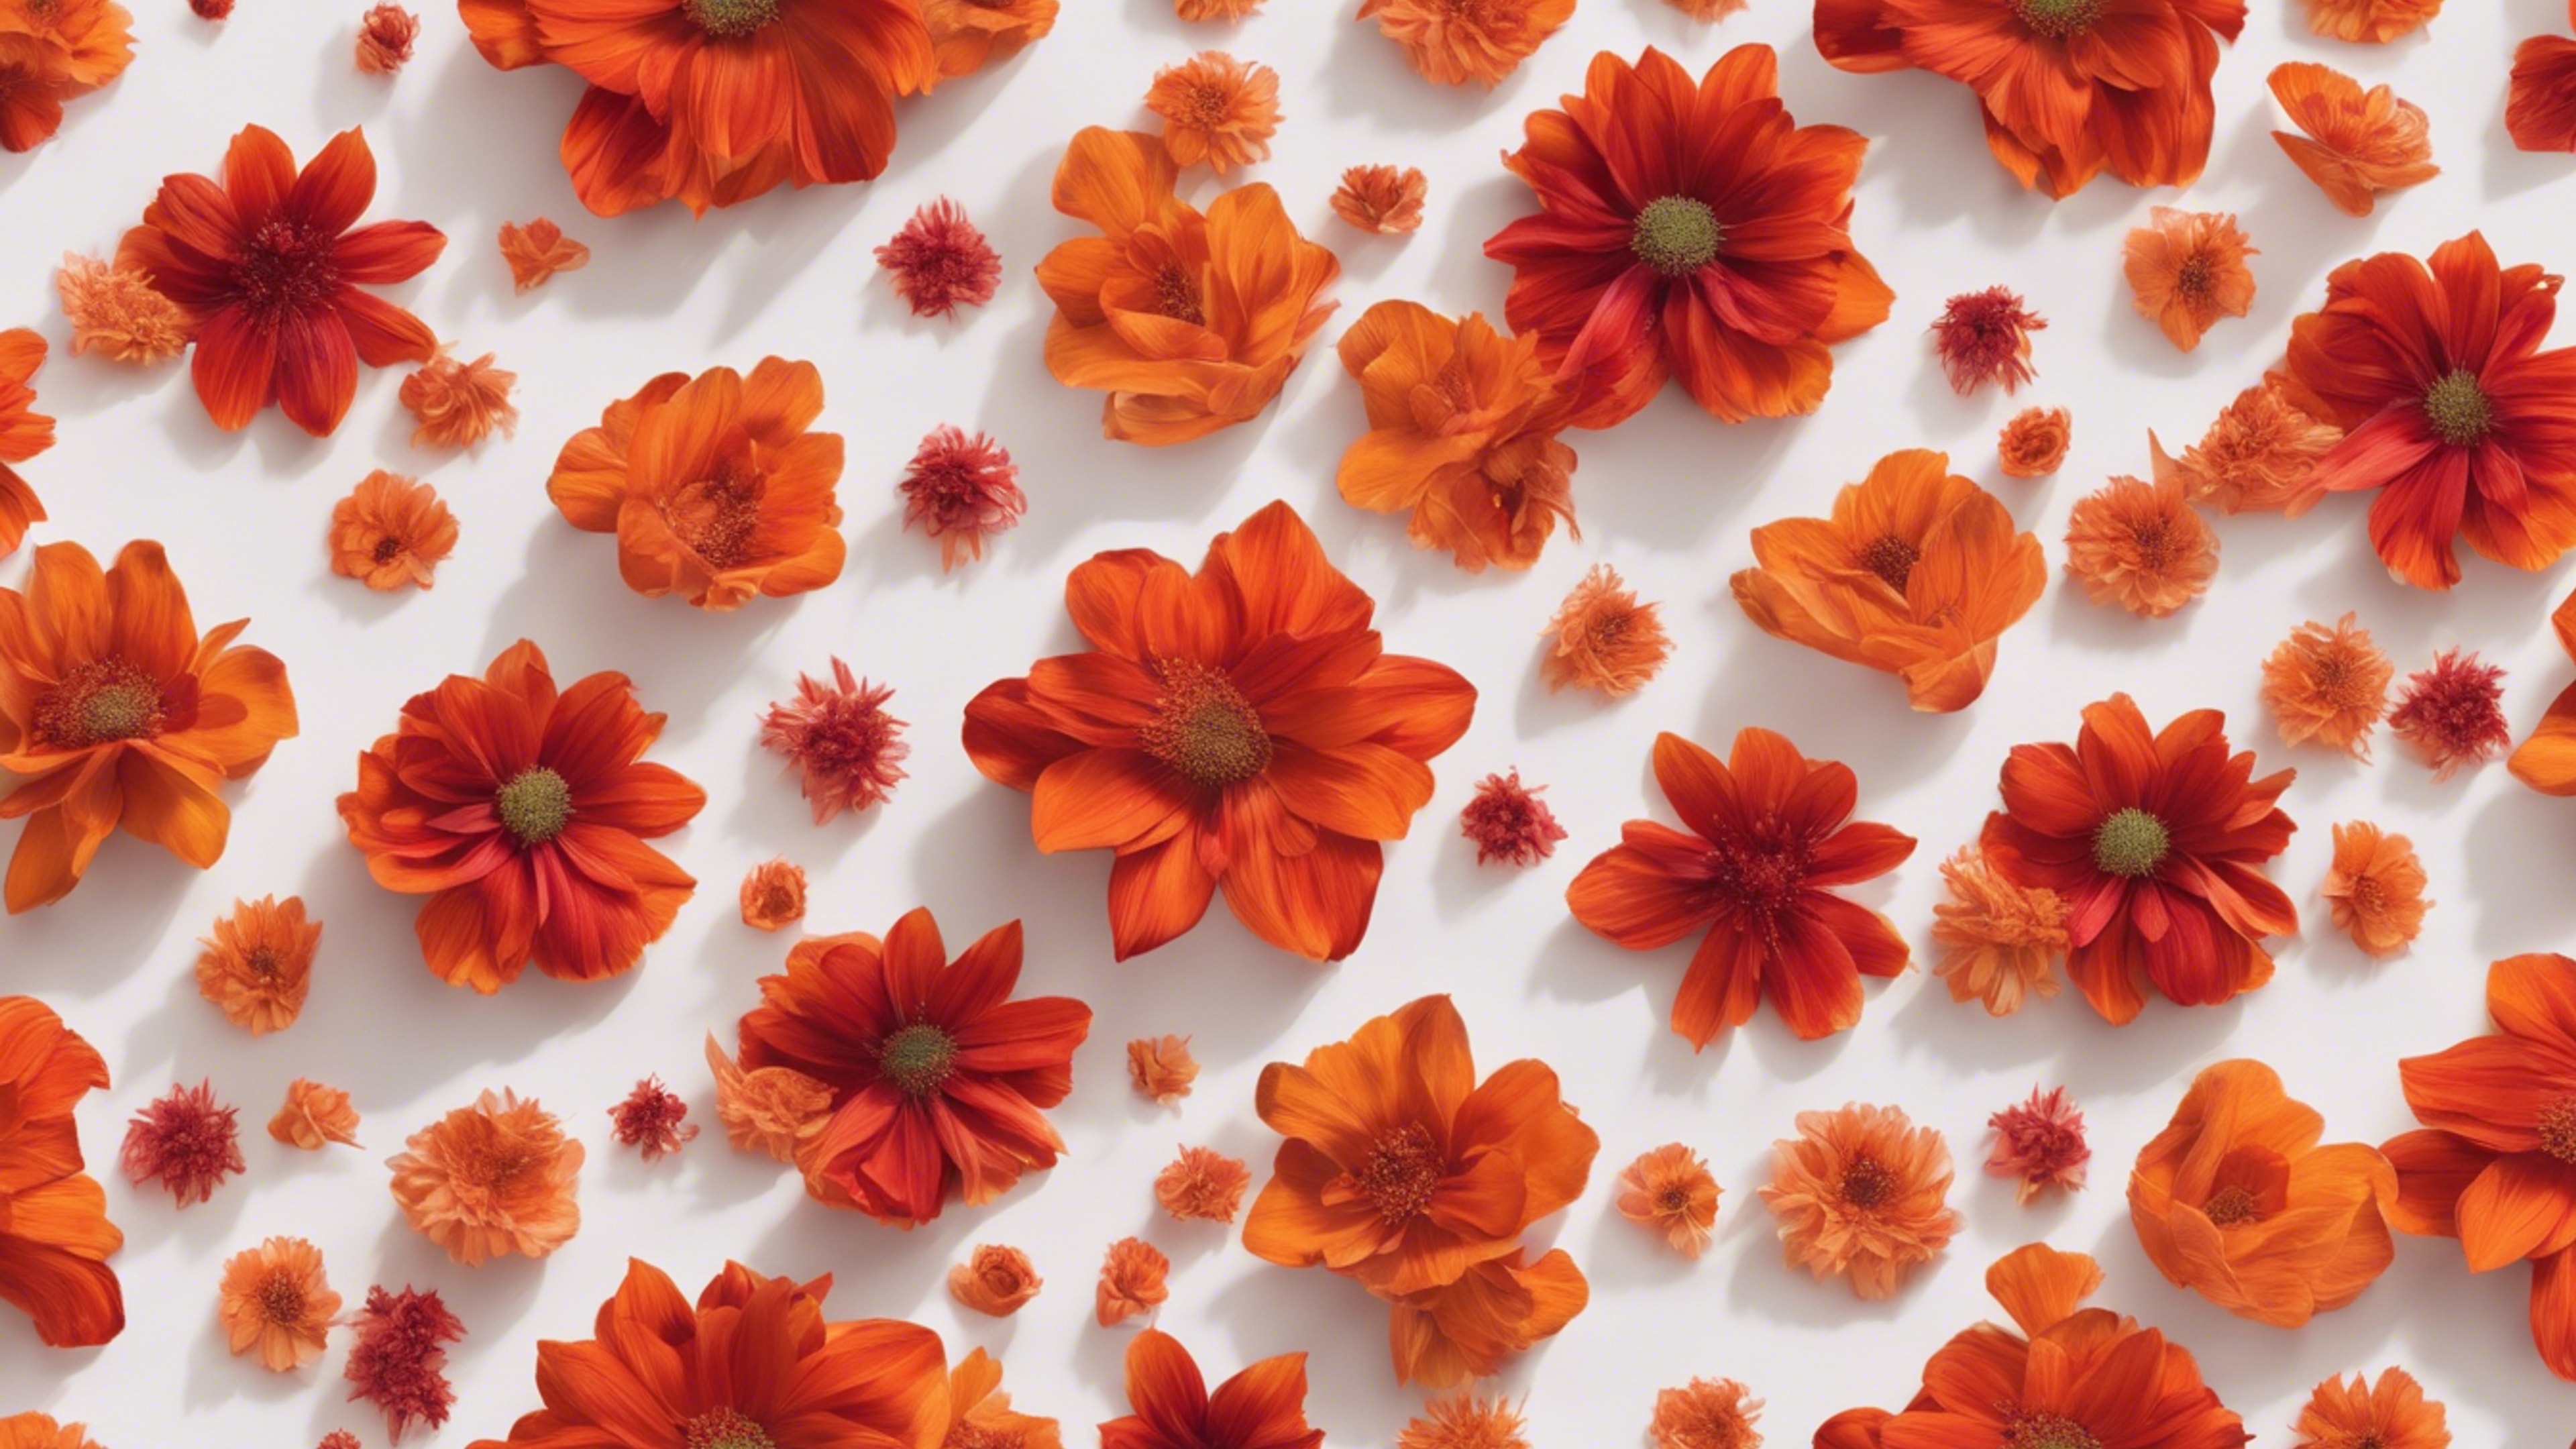 Vibrantly swirling patterns of red and orange flowers that consist of delicate petals and leaves in a seamless layout. کاغذ دیواری[1a3317c1e5234fee8b43]